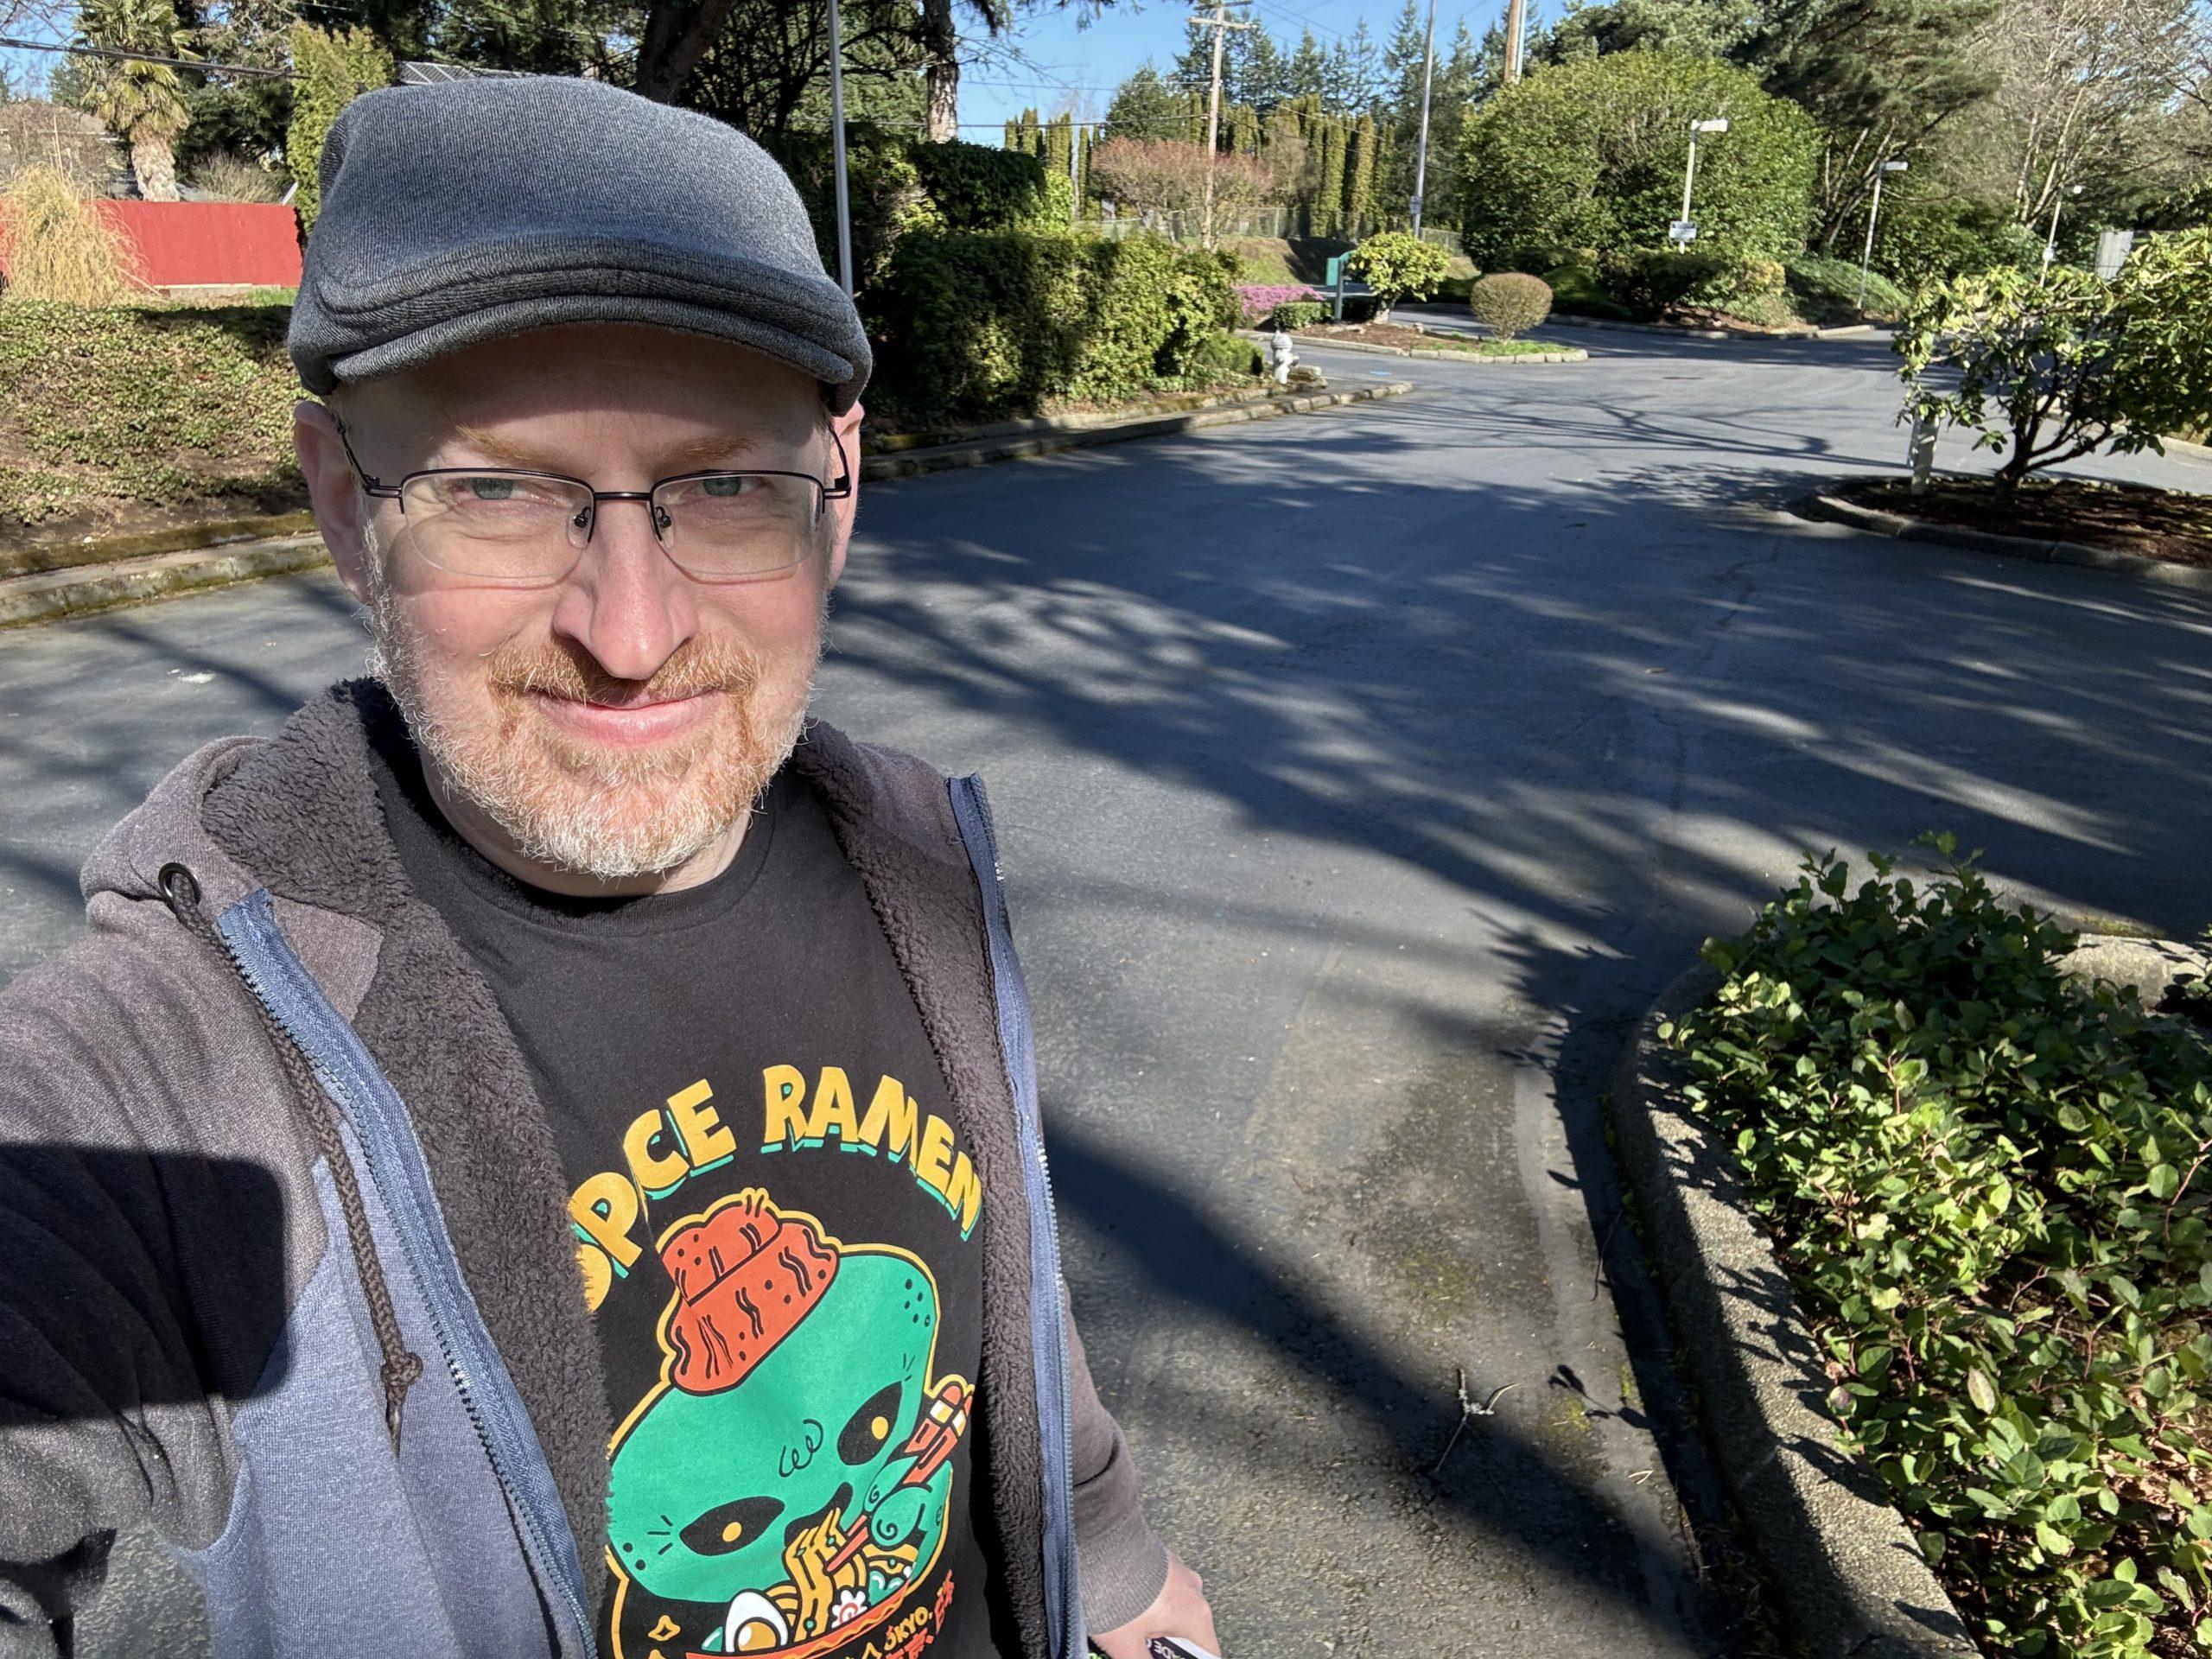 Me outside in the sun in our neighborhood.